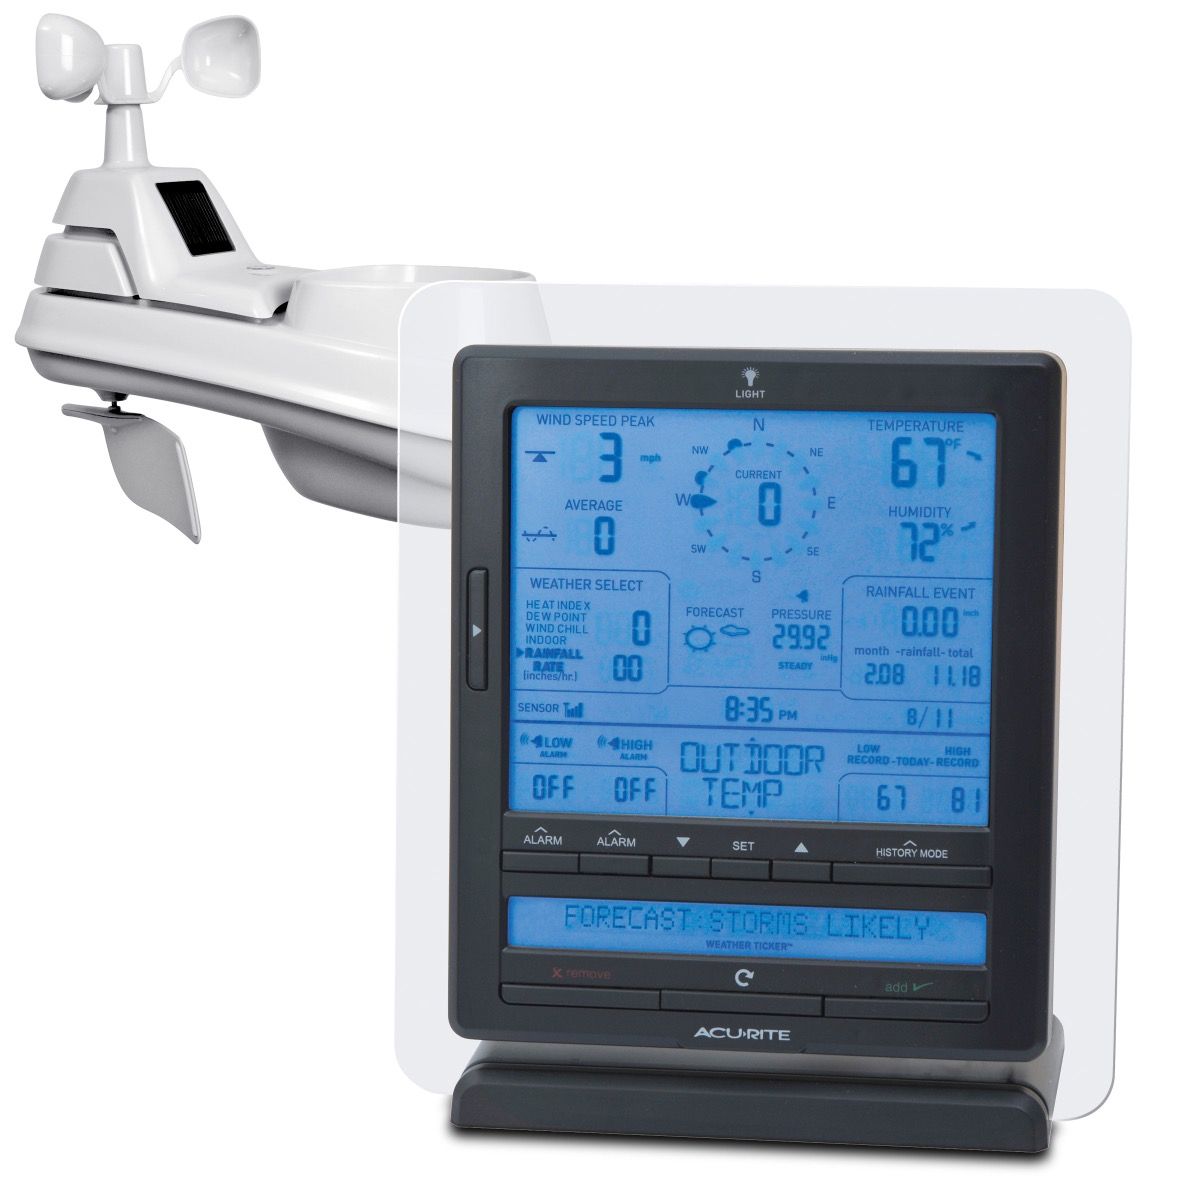 AcuRite Notos (3-in-1) Weather Station with Digital Display (1st Gen)